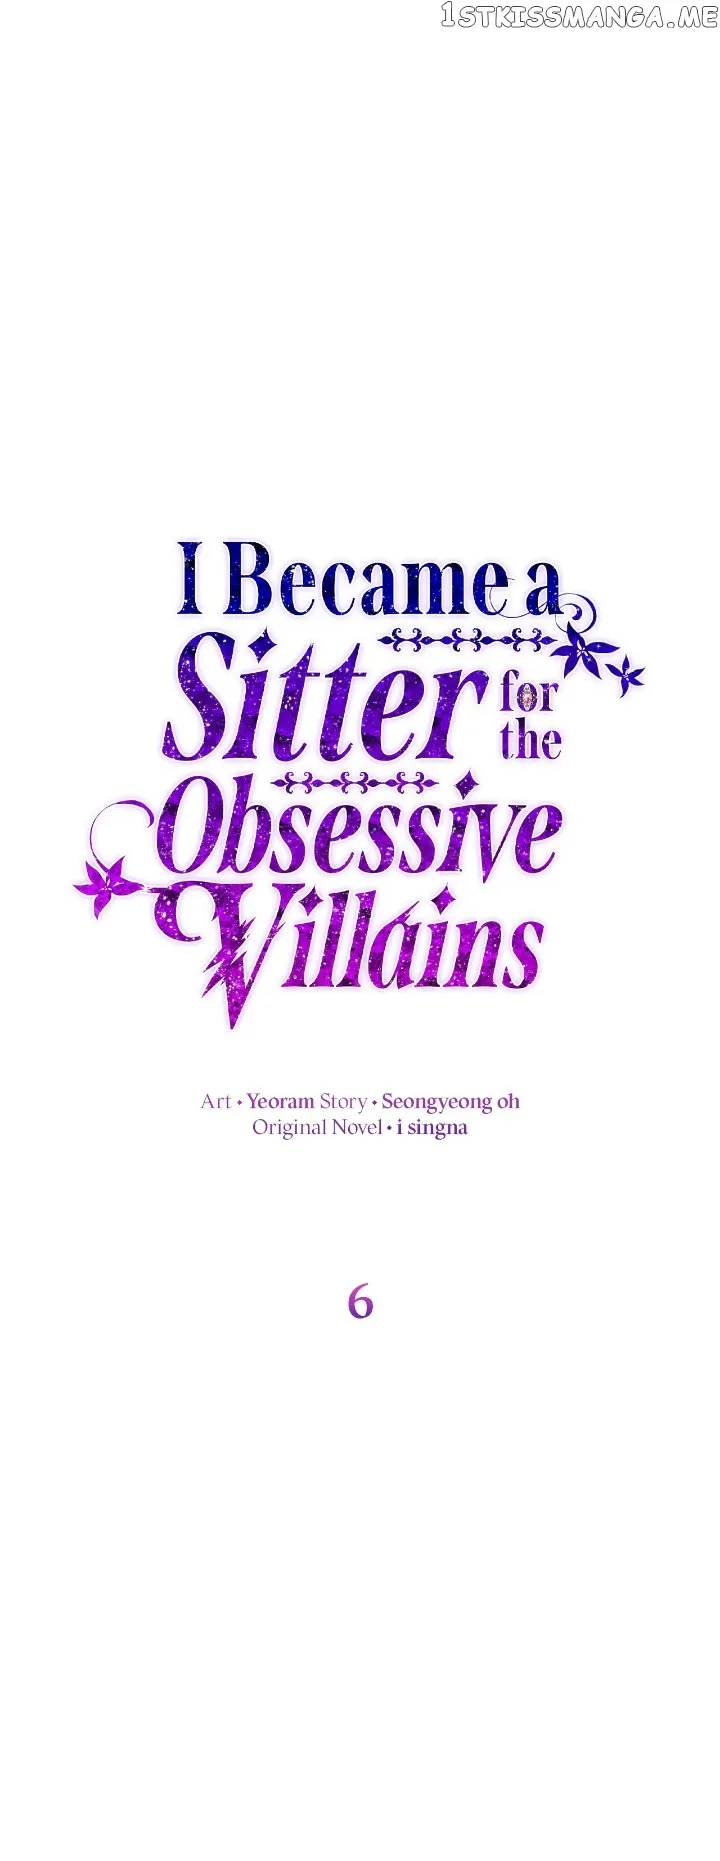 I Became a Sitter for the Obsessive Villains chapter 6